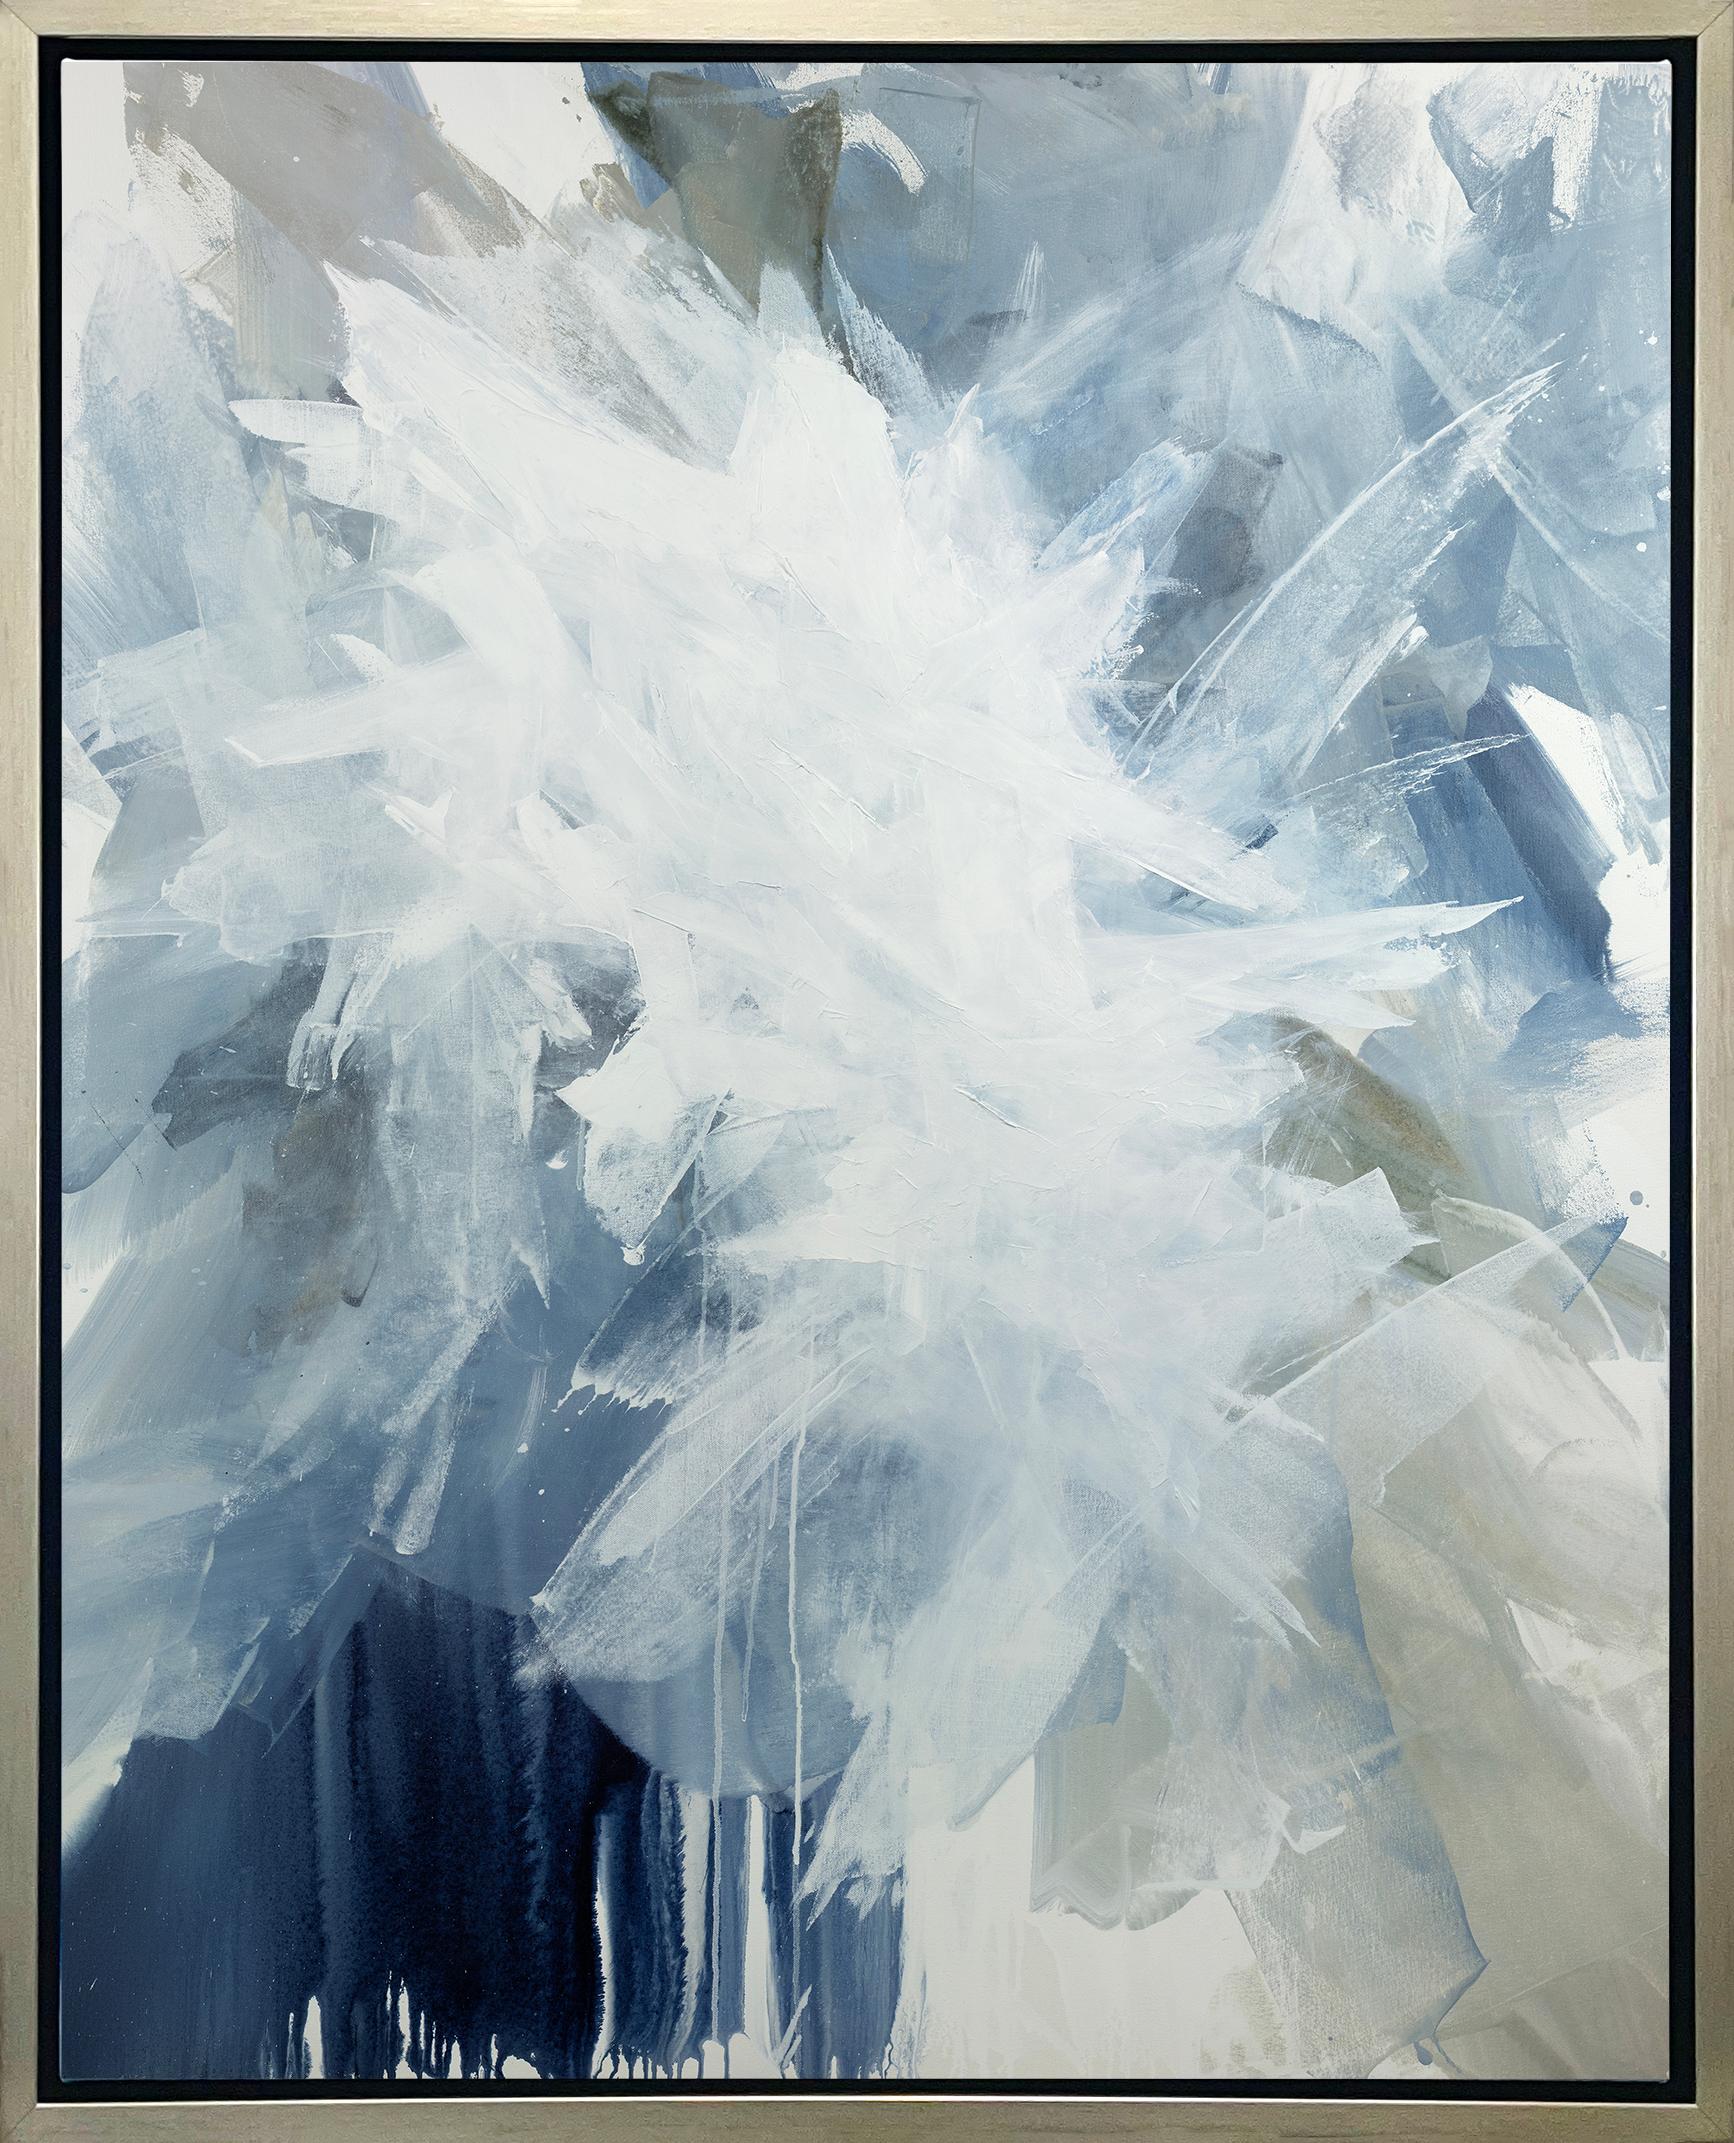 Teodora Guererra Abstract Print - "White Dove, " Framed Limited Edition Giclee Print, 60" x 48"